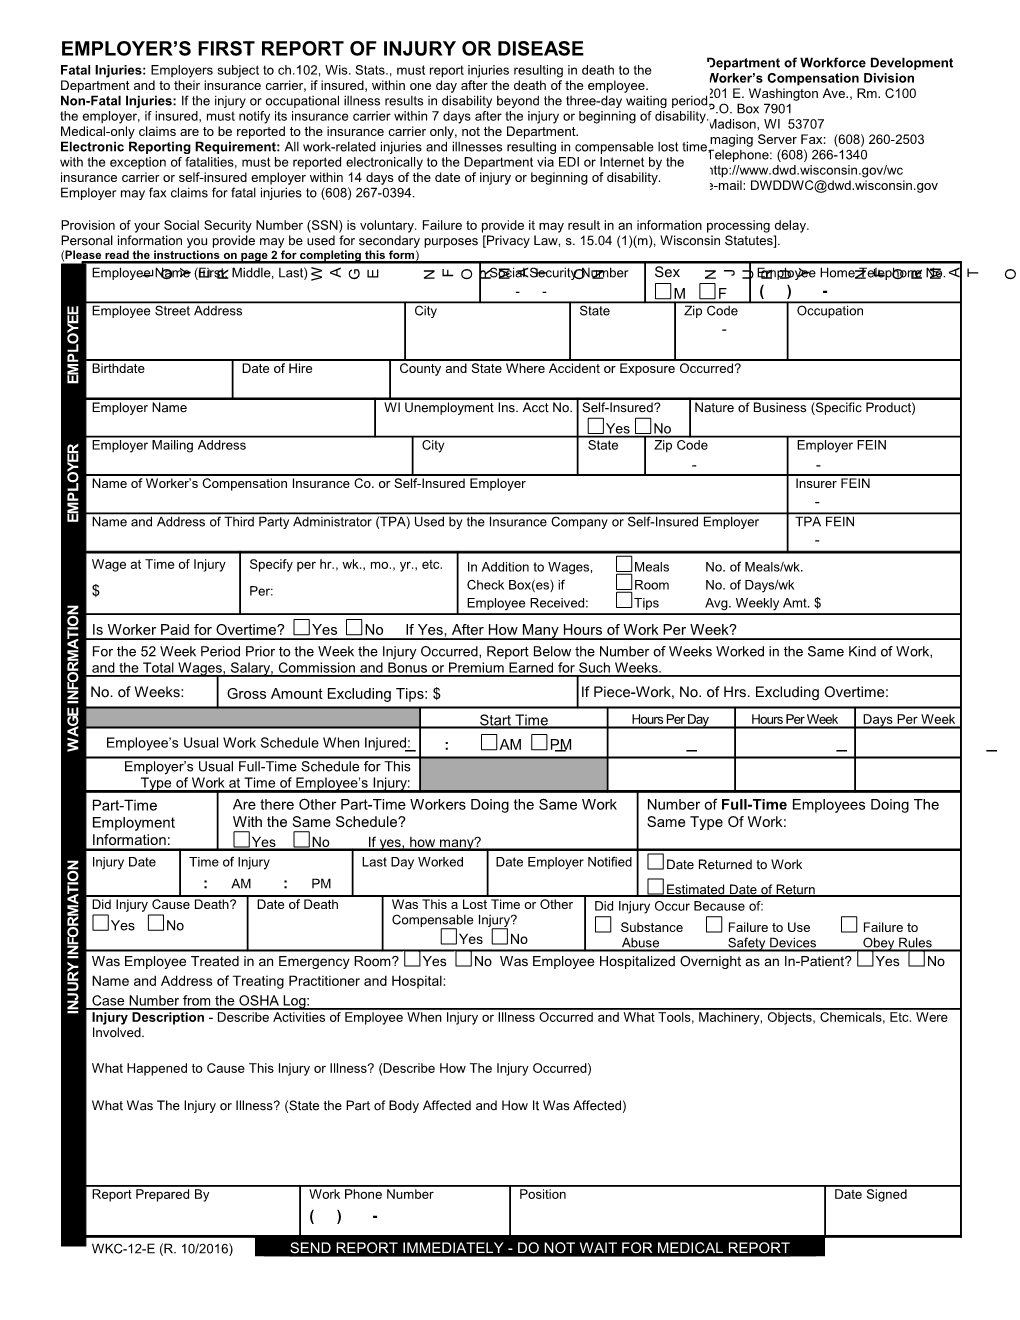 WKC-12-E, Employer's First Report of Injury Or Disease